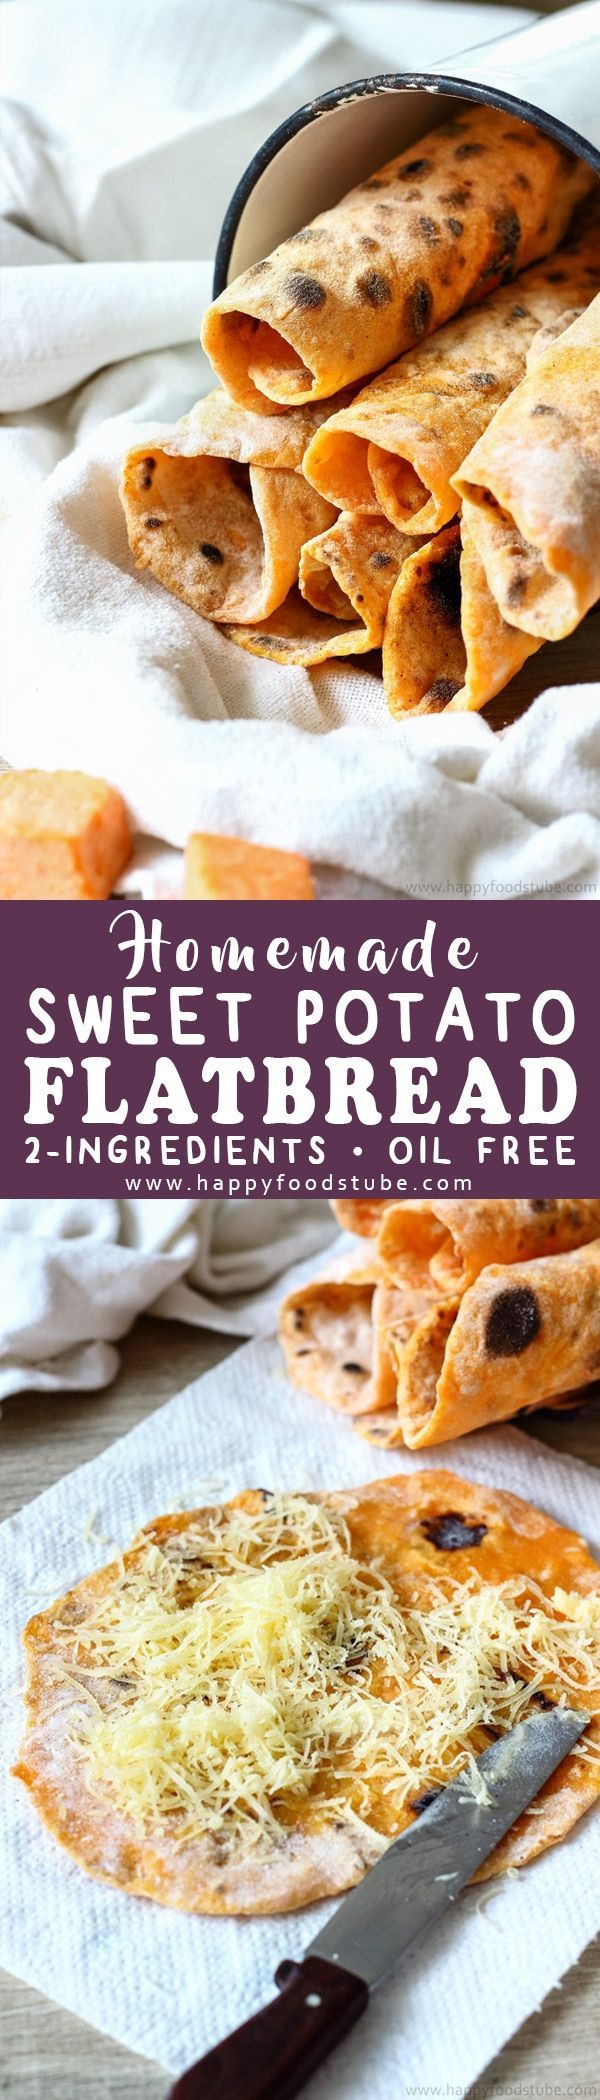 Homemade sweet potato flatbread is a delicious 2-ingredient side dish. This oil-free and yeast free flatbread goes well with